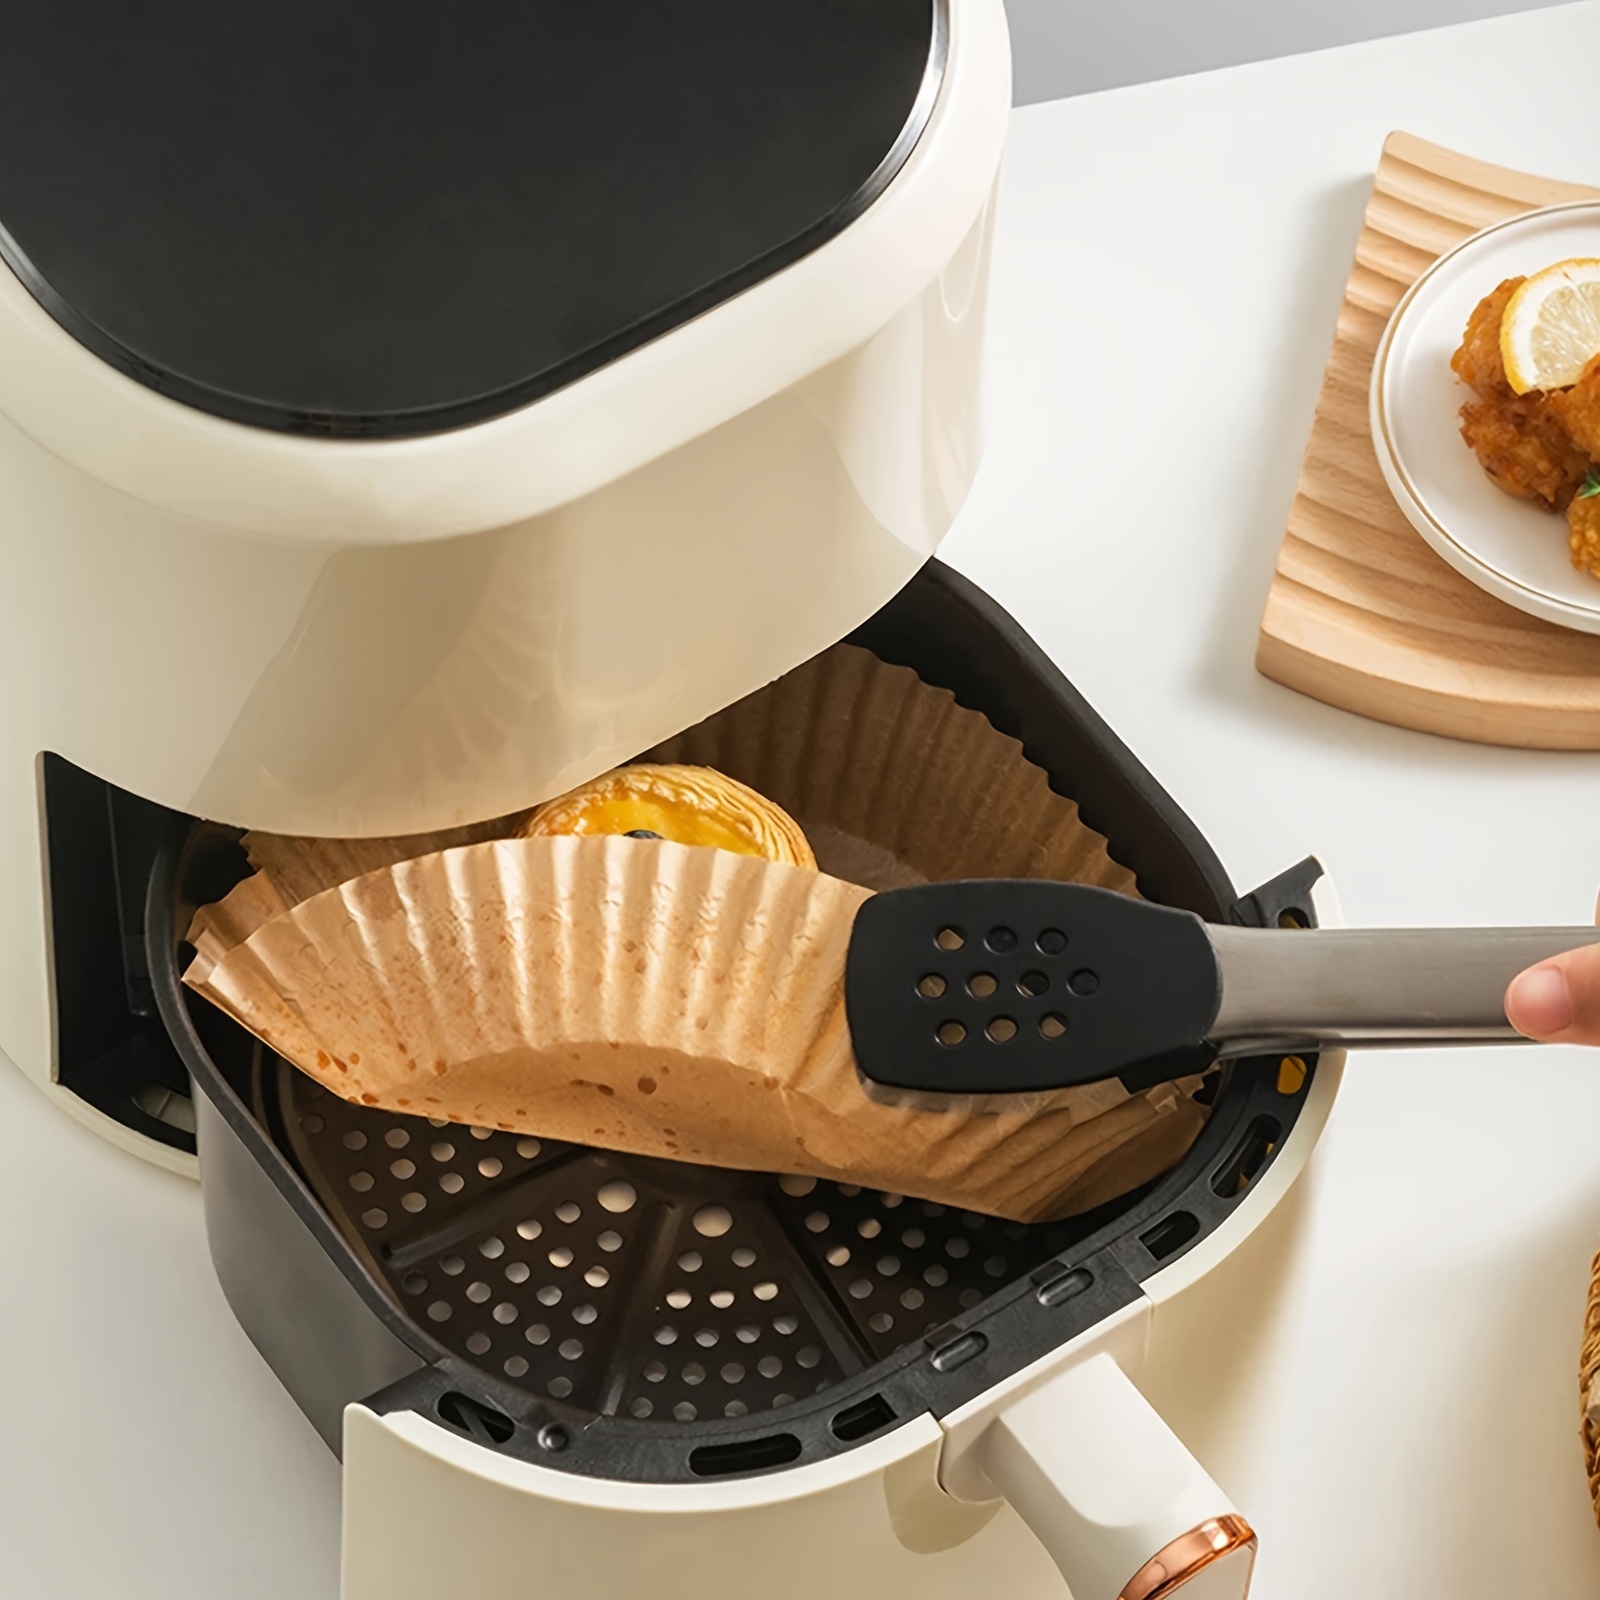 Air Fryer Paper Trays Baking Paper Molds Oil-proof Disposable